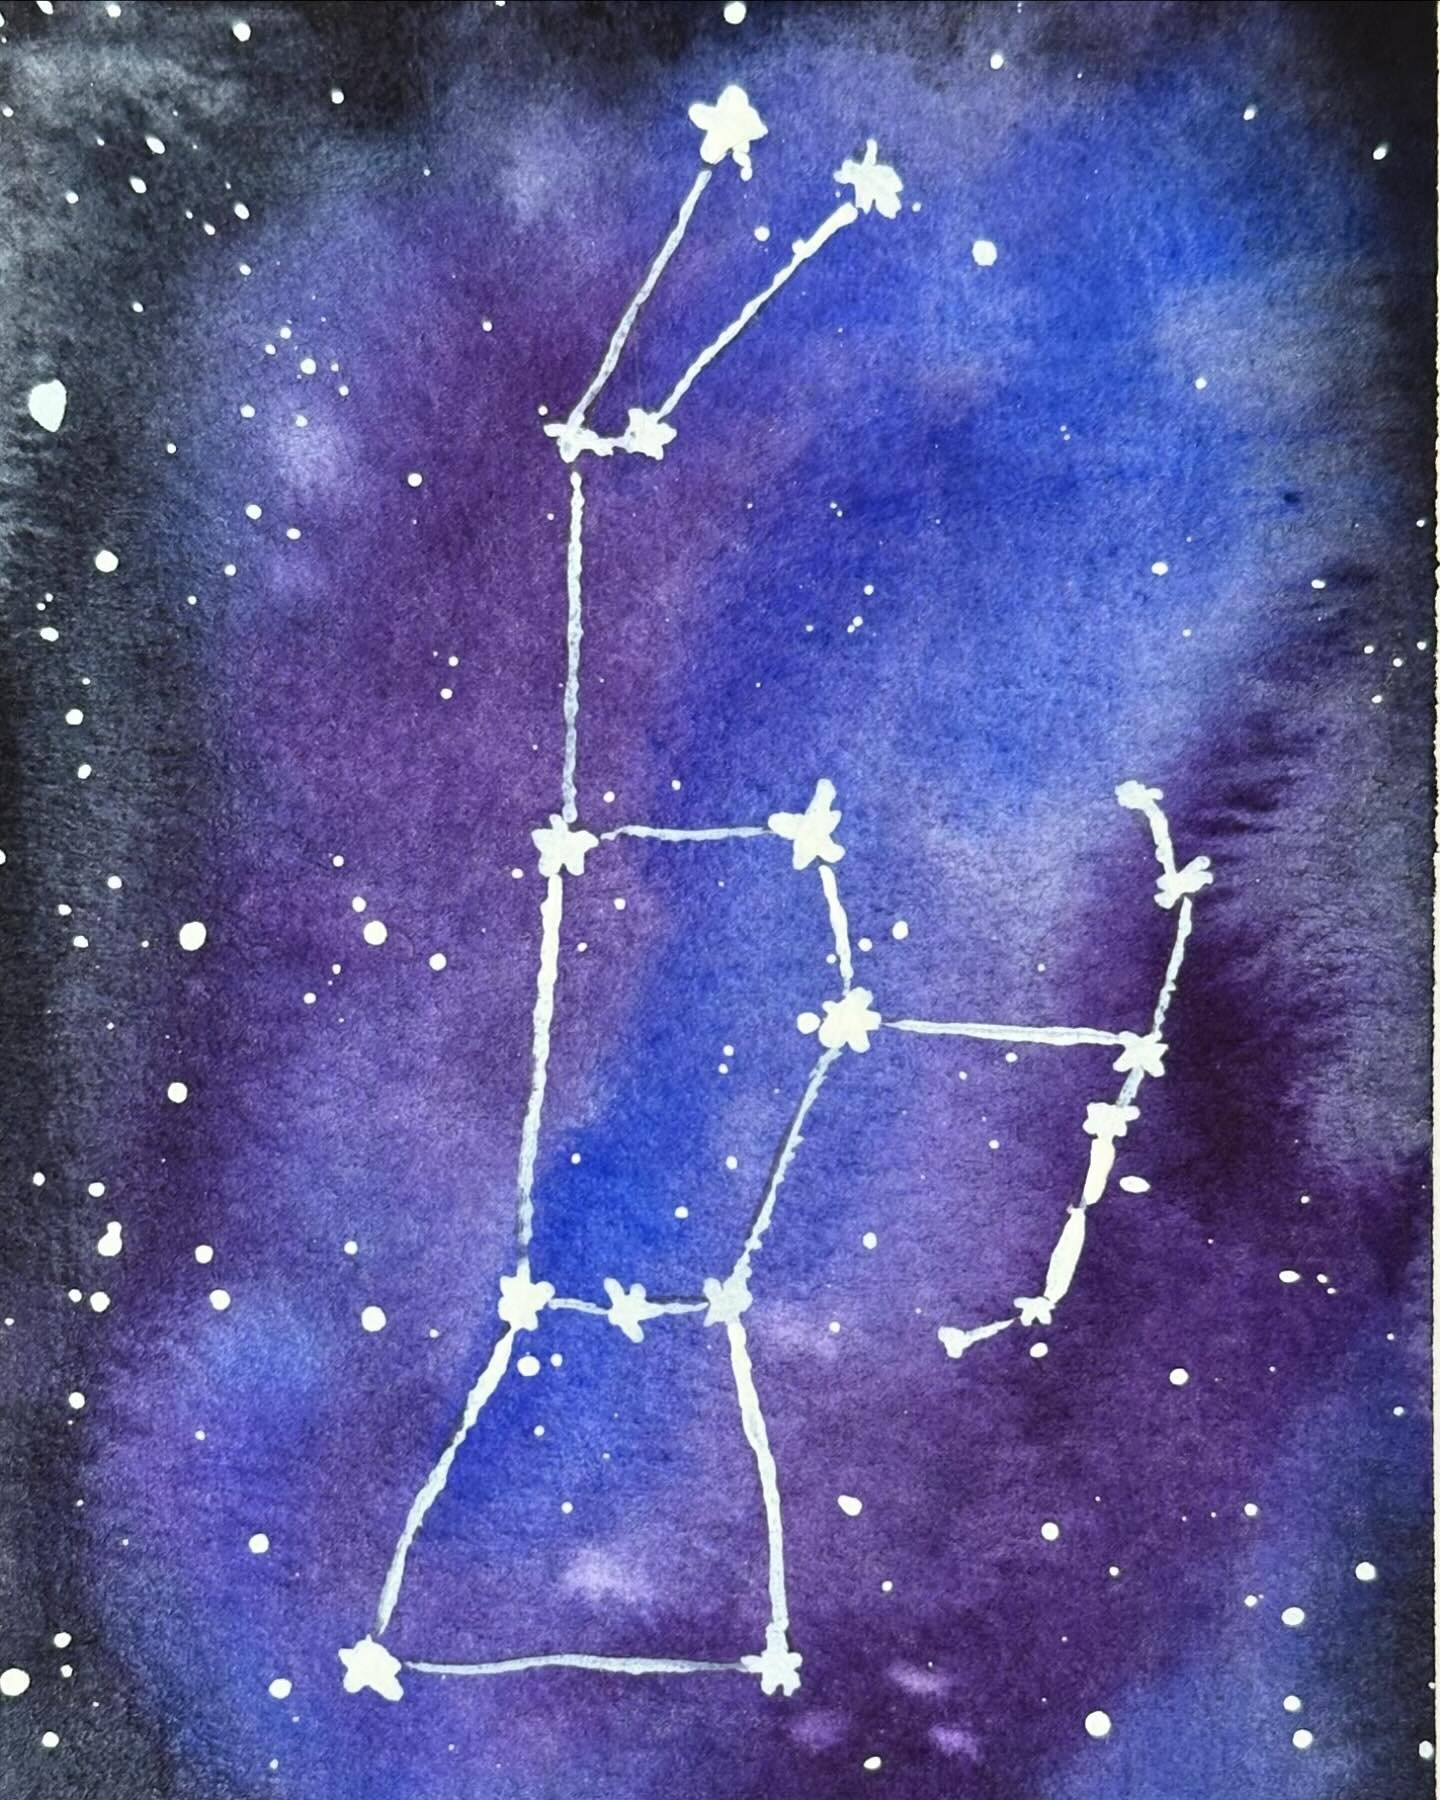 Orion painted on a postcard. It&rsquo;s one of my favorite constellations. Probably because it&rsquo;s one of the few I can find easily. 

#letsmakeartwatercolor #letsmakeart #watercolor #watercolorpainting